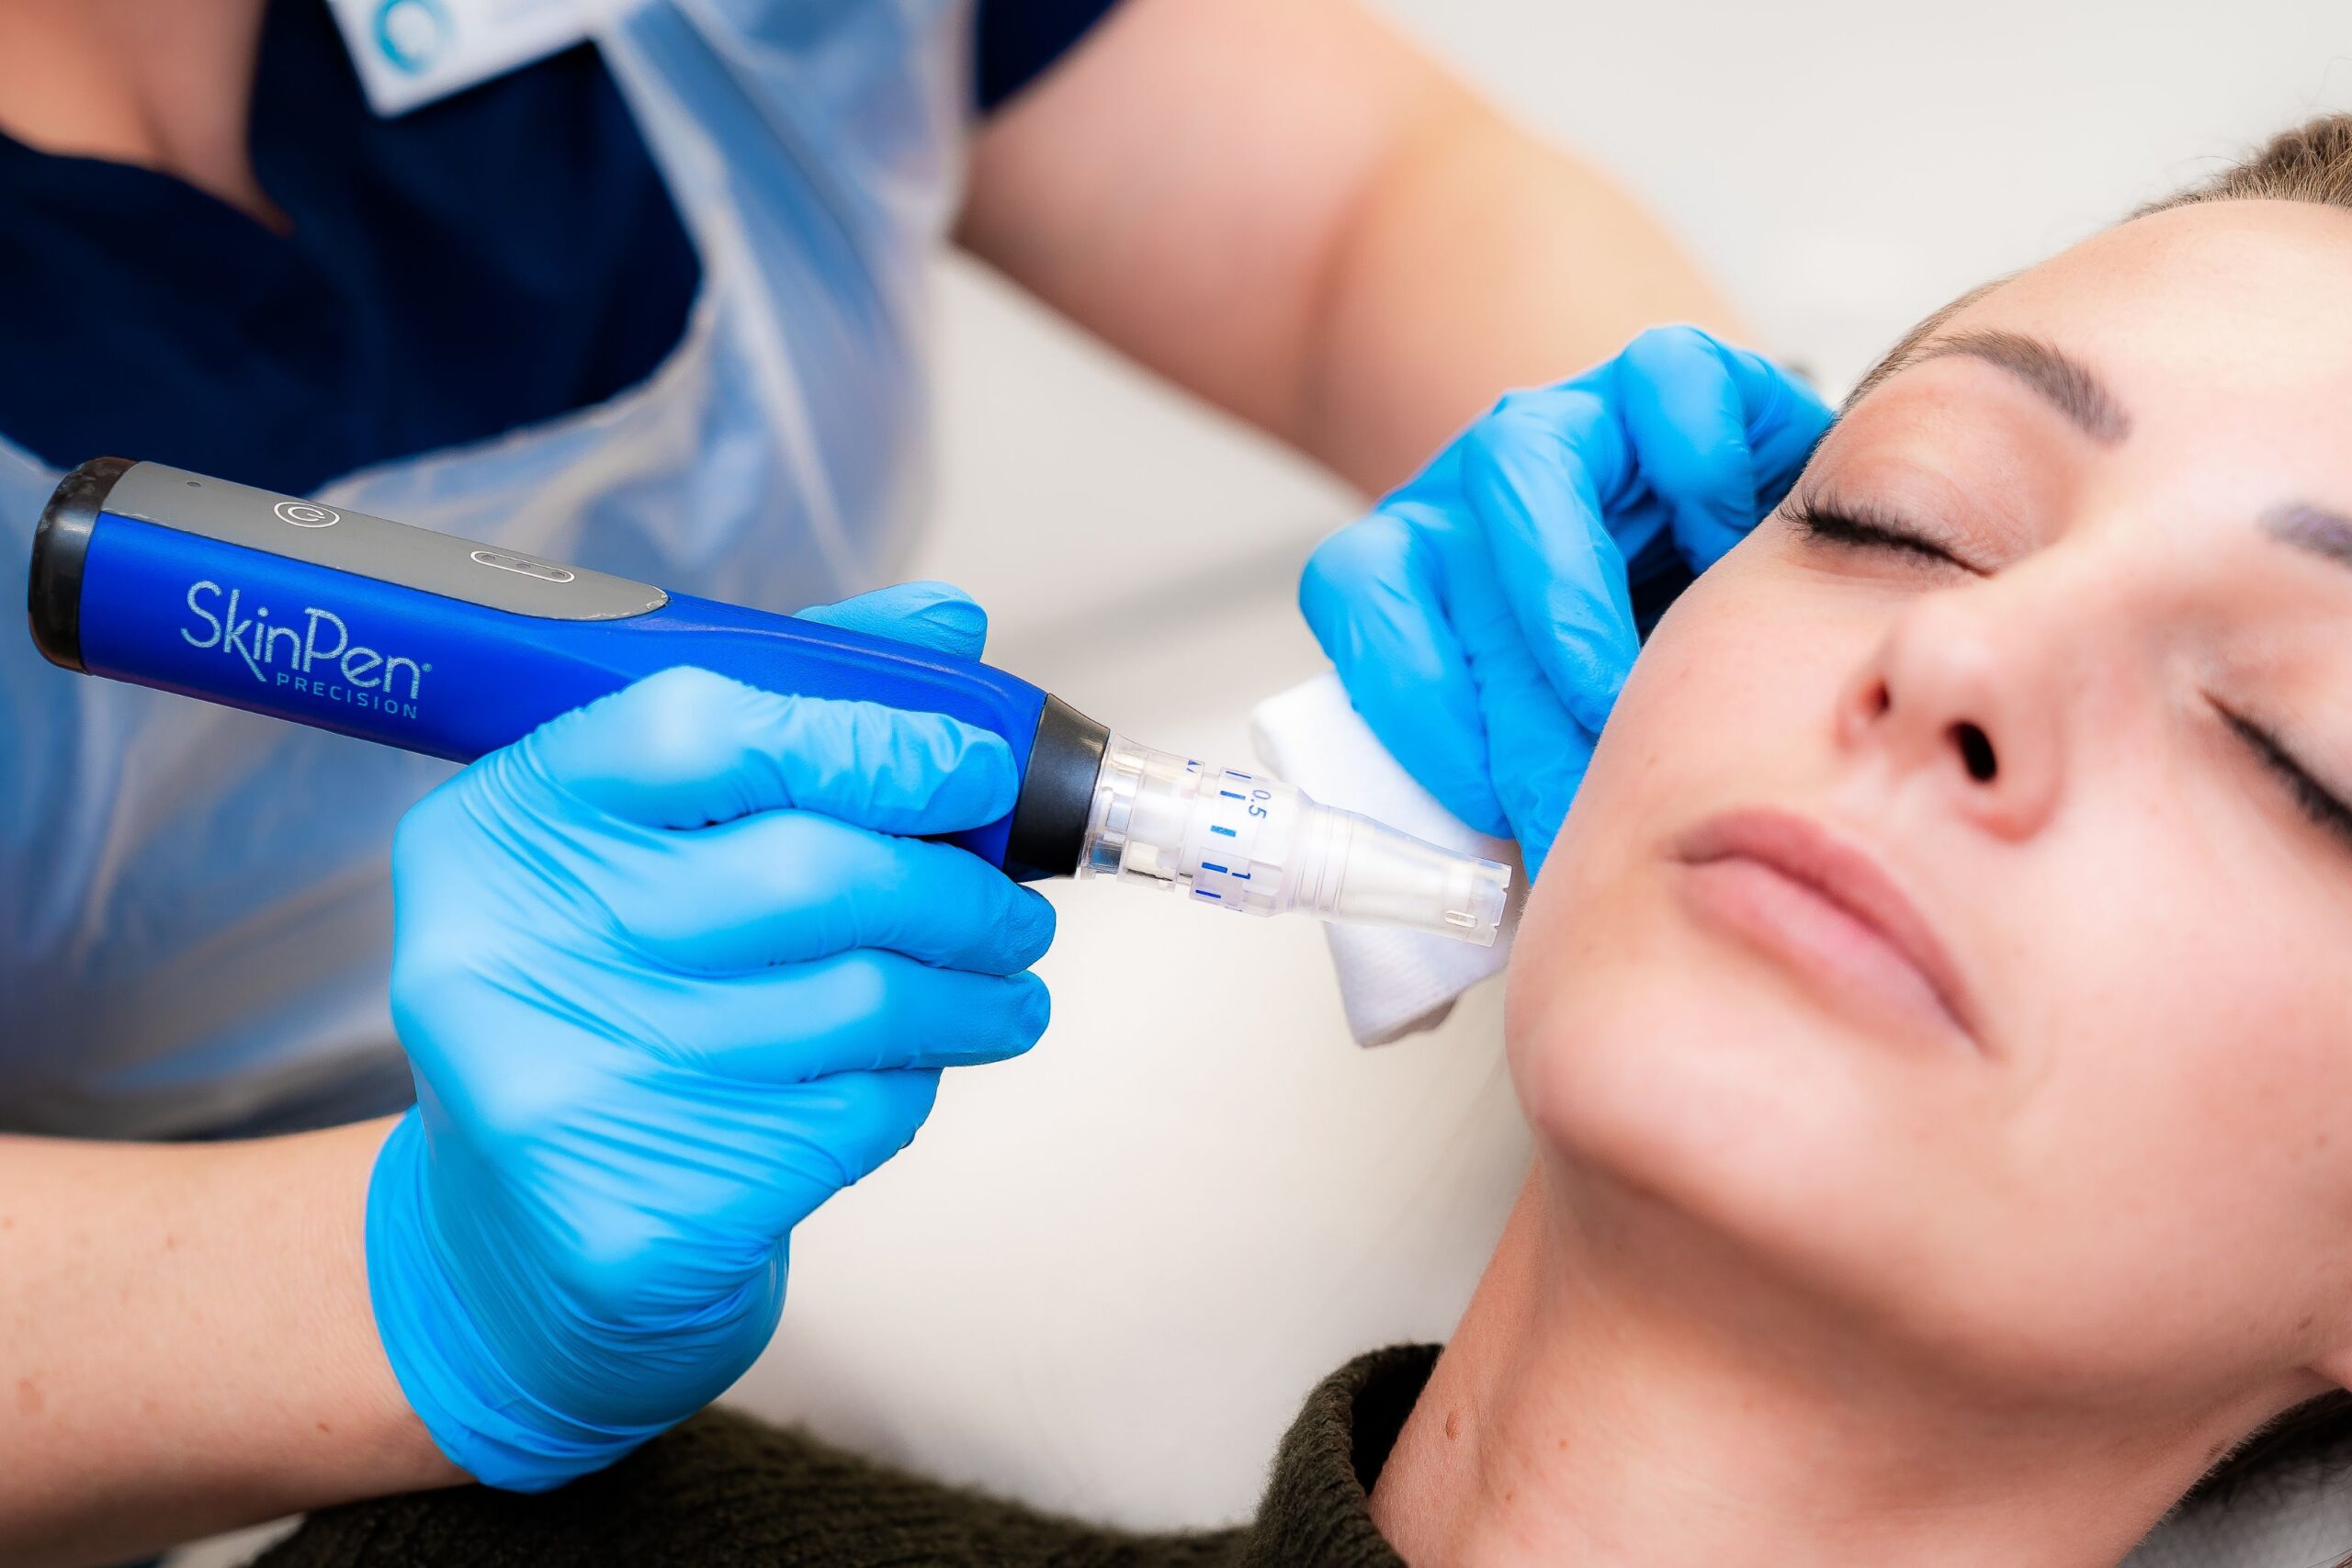 Microneedling for uneven skin texture and pigmentation at Freyja Medical in Wrexham, Nantwich and Cheshire